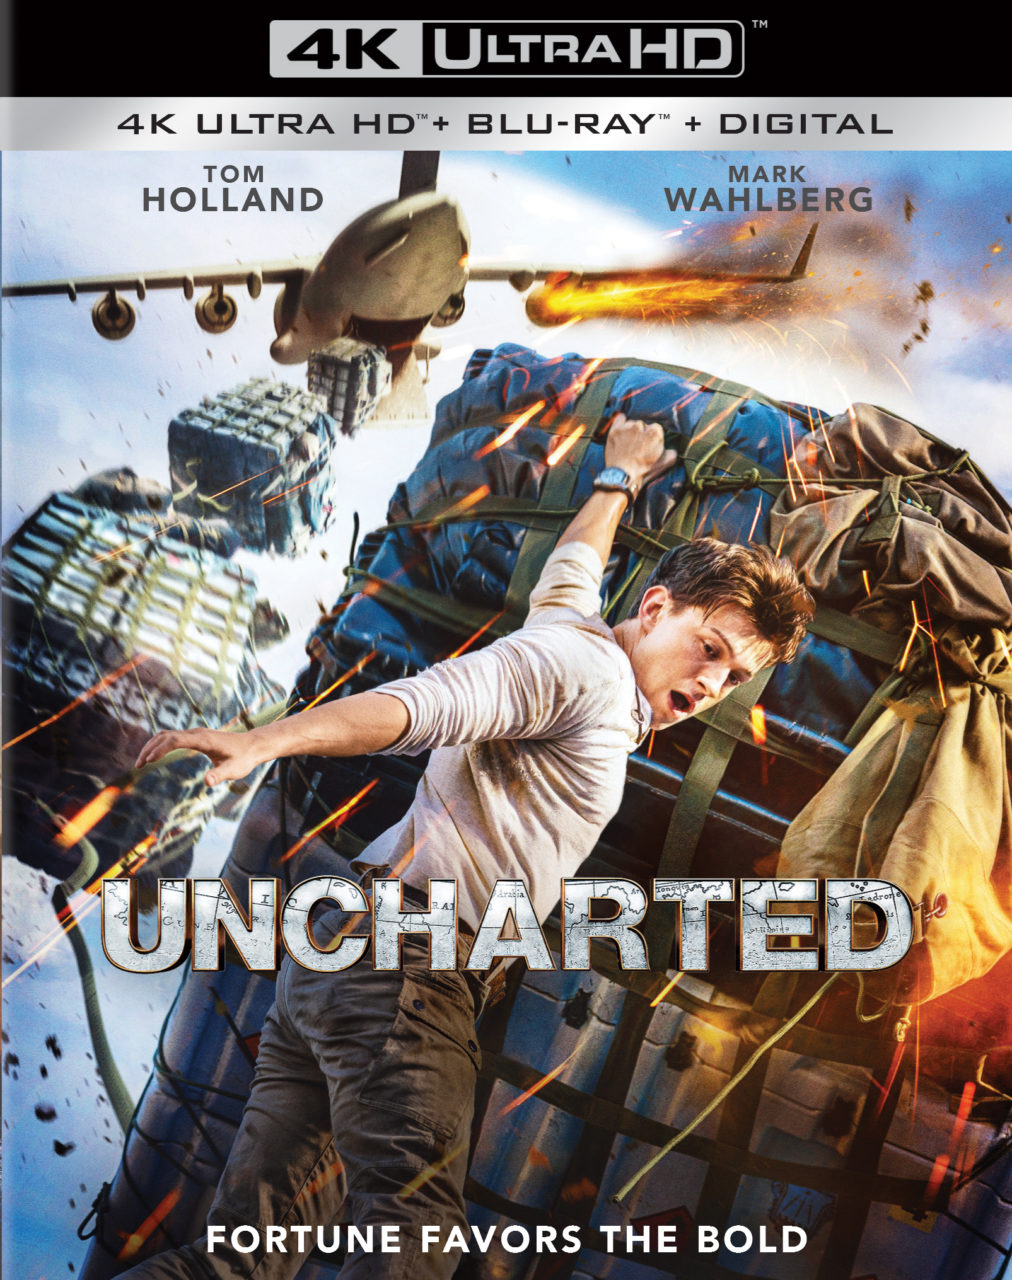 Uncharted 4K Ultra HD Combo Pack cover (Sony Pictures Home Entertainment)